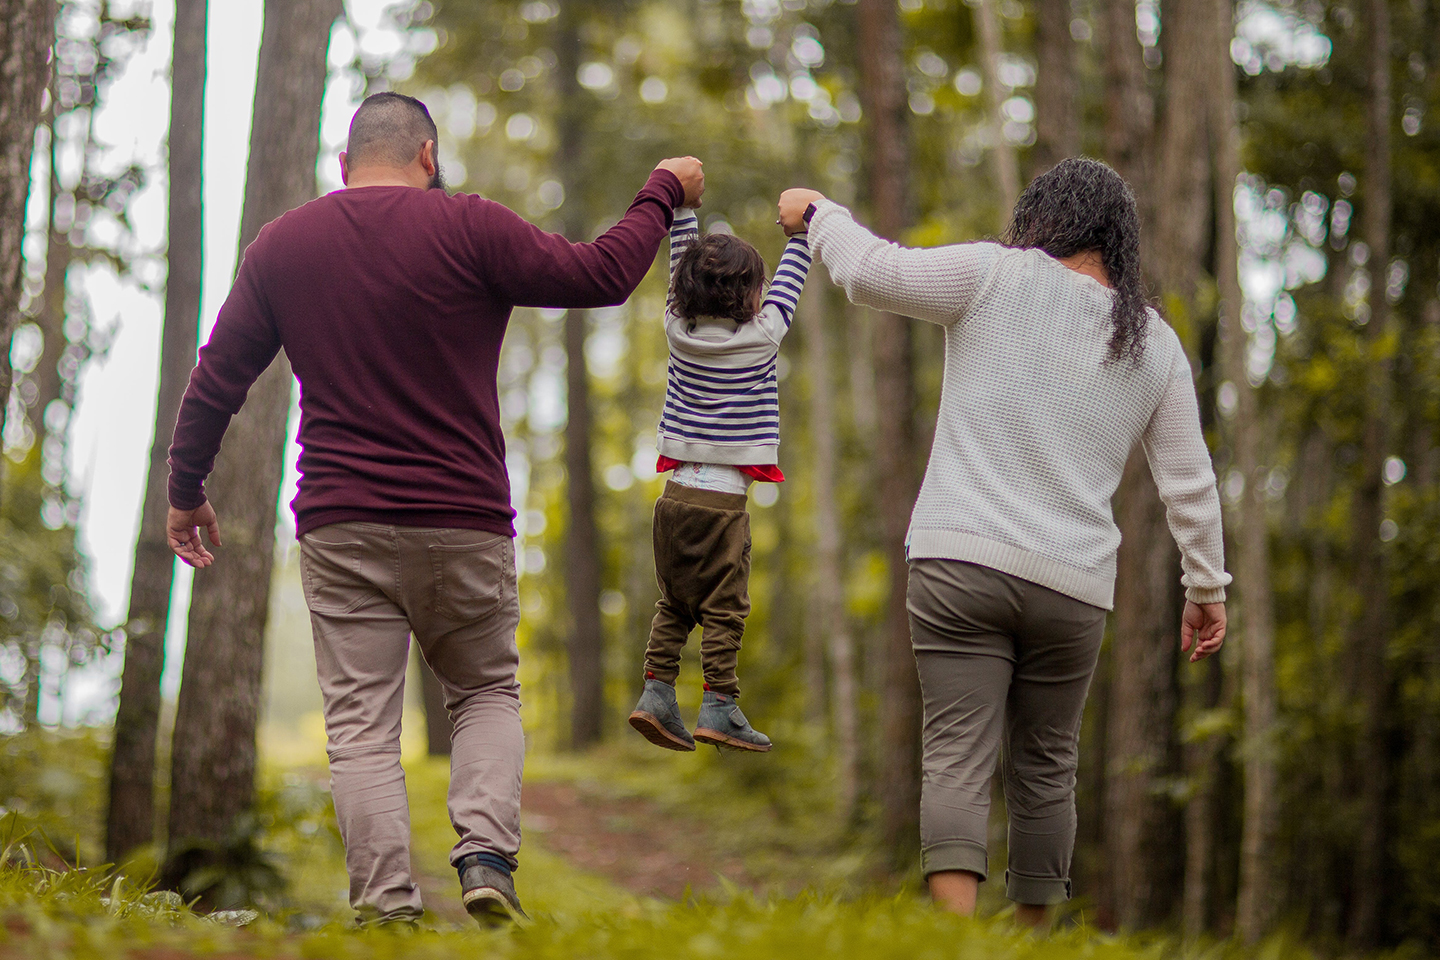 Man and Woman swinging child in the air playfully in an wooded area. The ‘one-stop shop’ for families—Family Hubs and Start for Life now open in local authorities across half the country